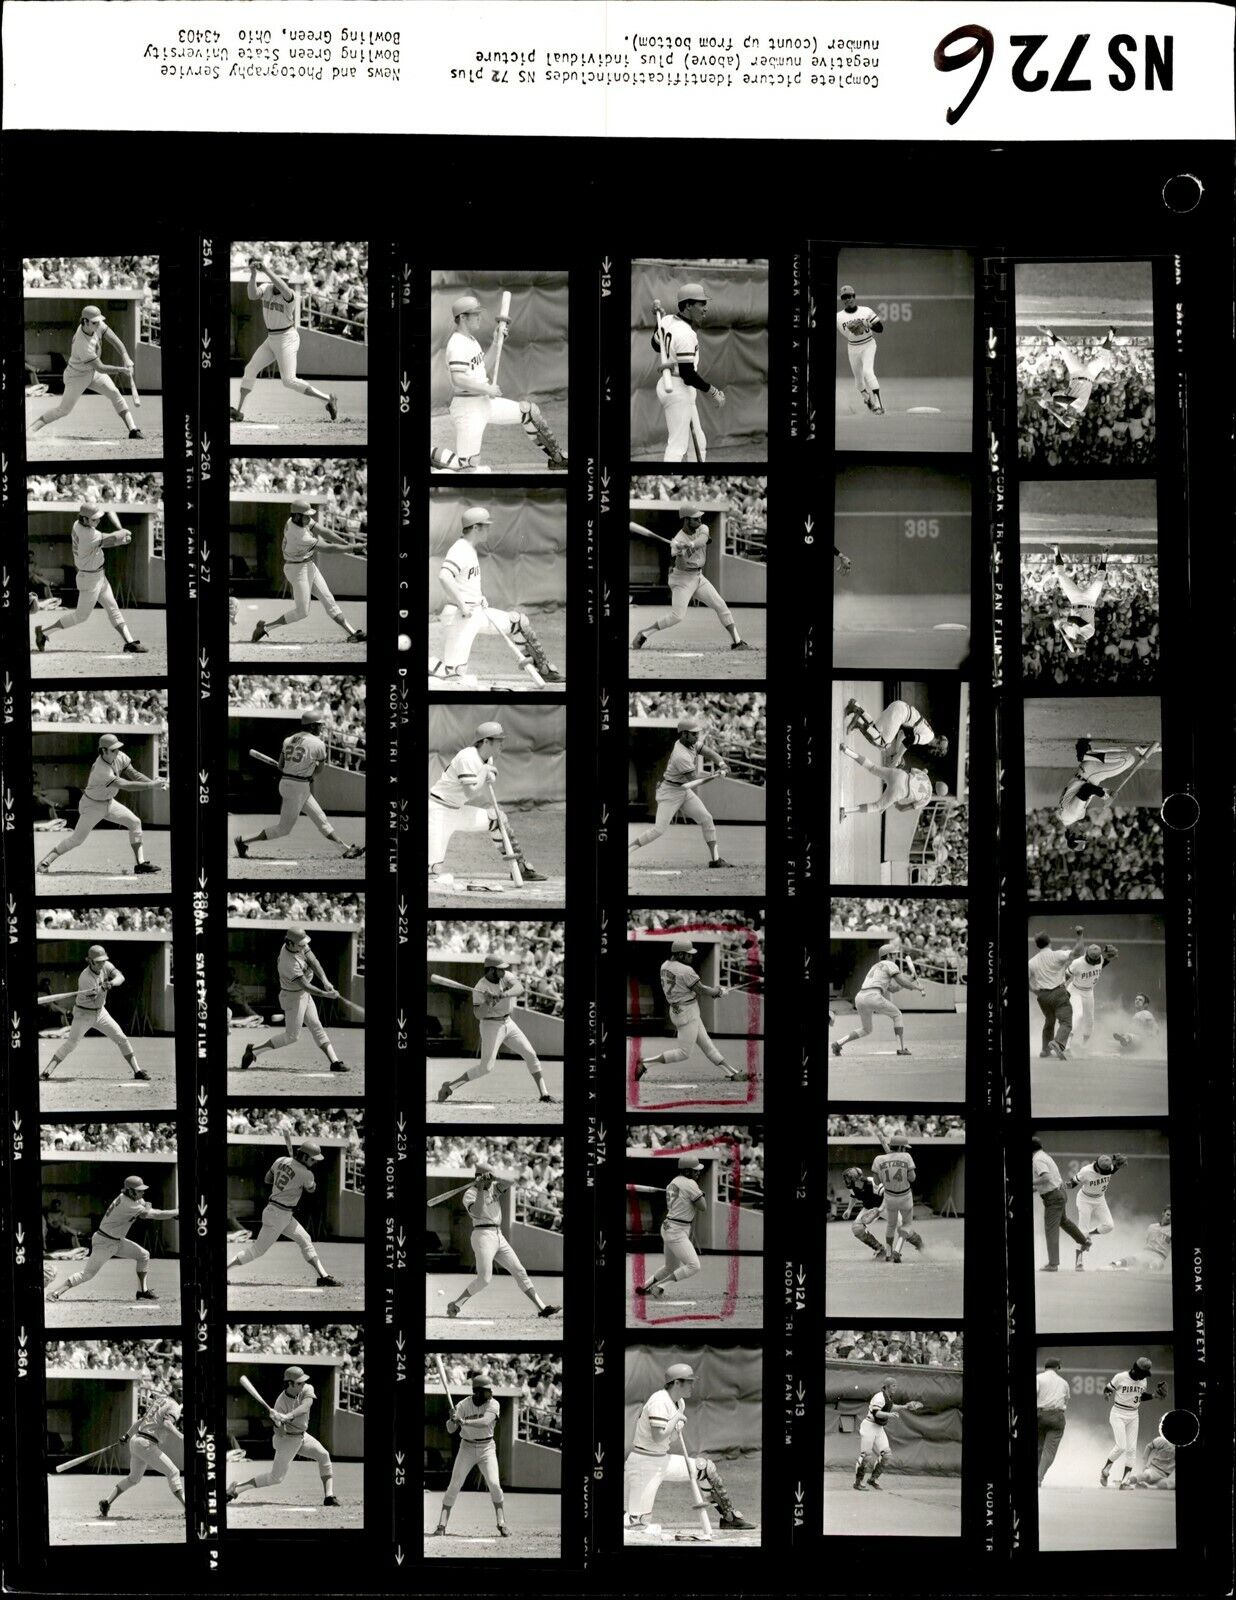 LD230 1973 Orig Contact Sheet Photo DAVE CASH PITTSBURGH PIRATES HOUSTON ASTROS